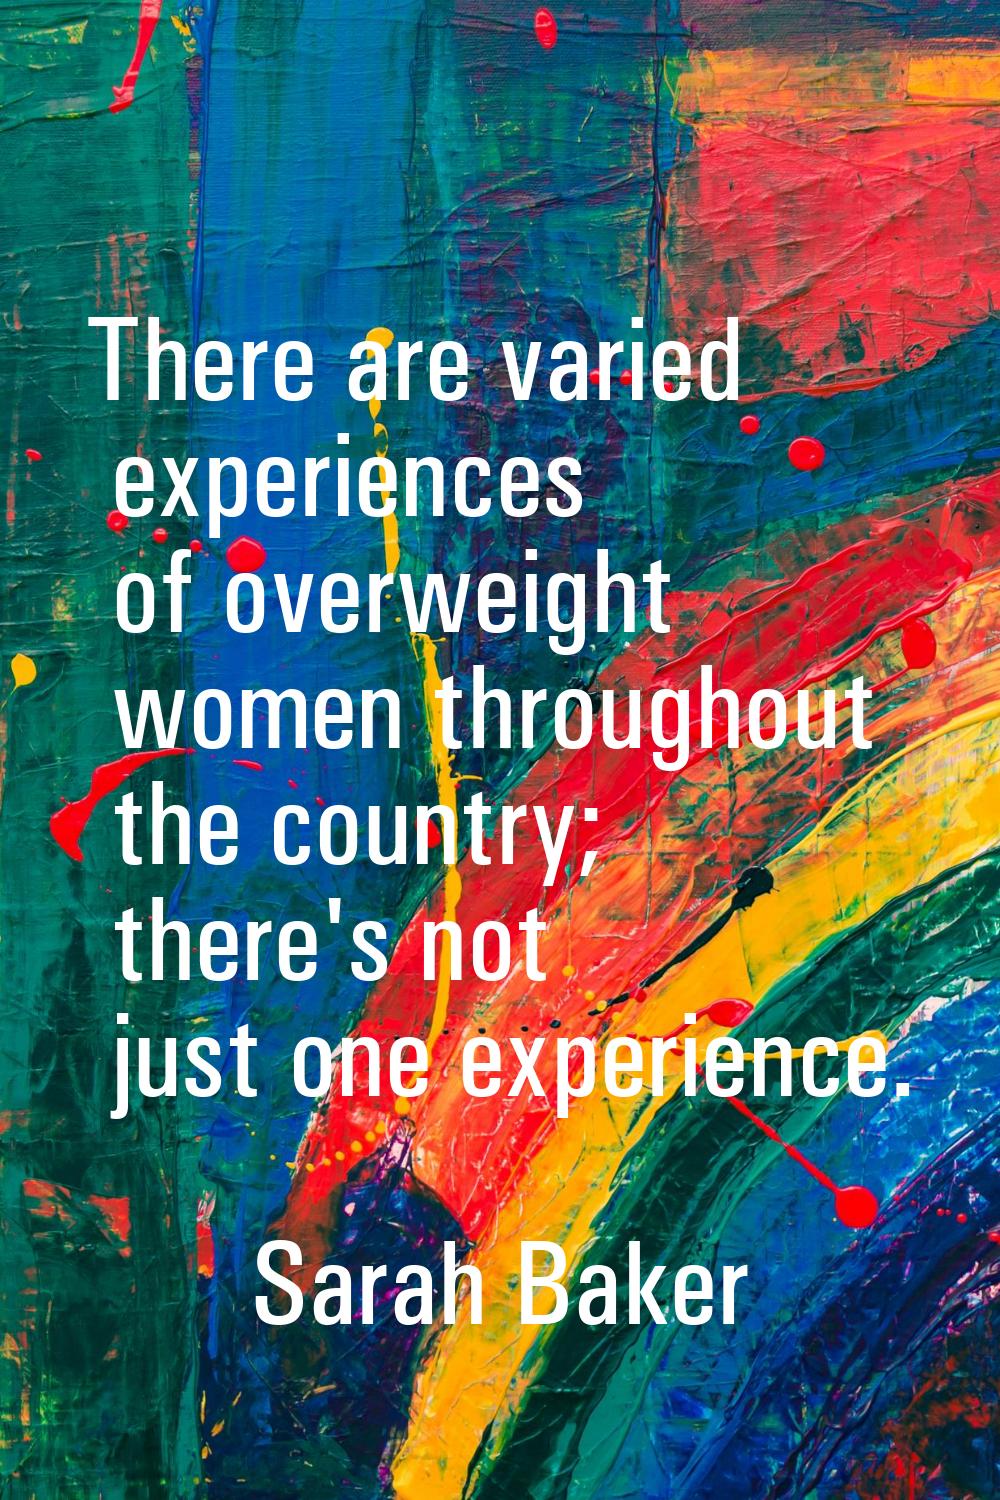 There are varied experiences of overweight women throughout the country; there's not just one exper